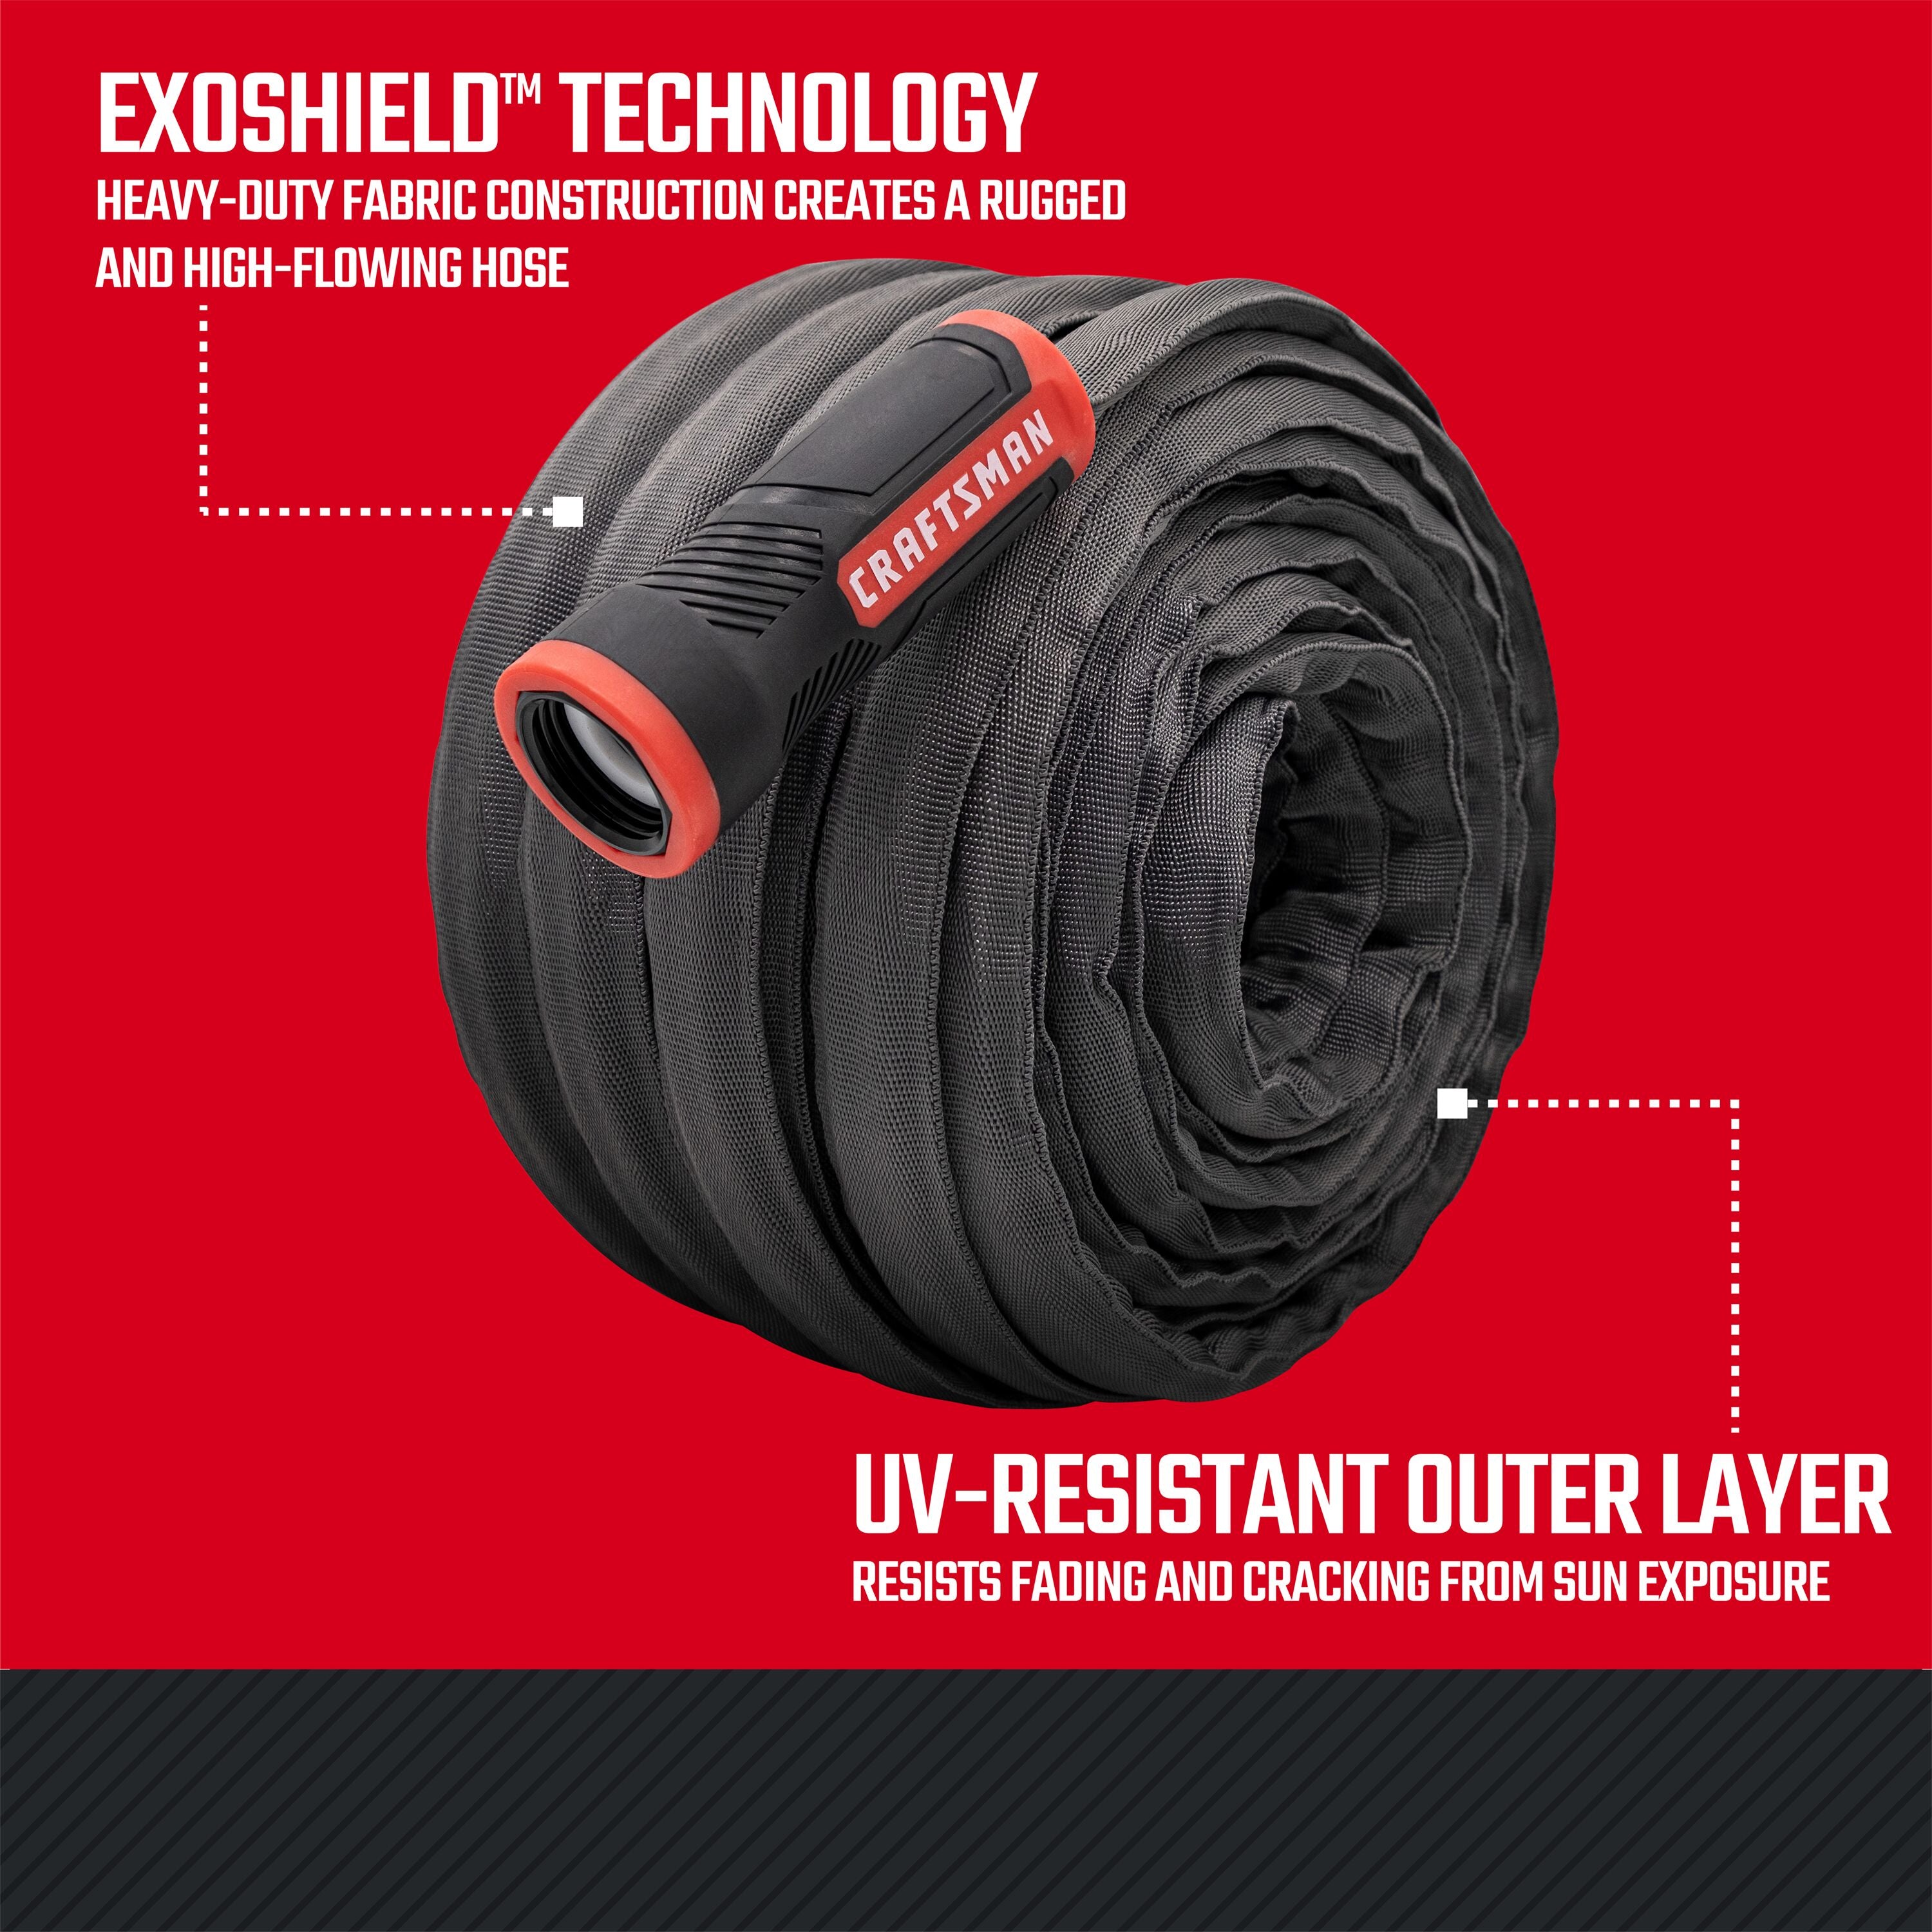 Black and red craftsman heavy-duty fabric hose, 50-foot by 5/8 inch. Featuring UV-resistant exoshield technology graphic